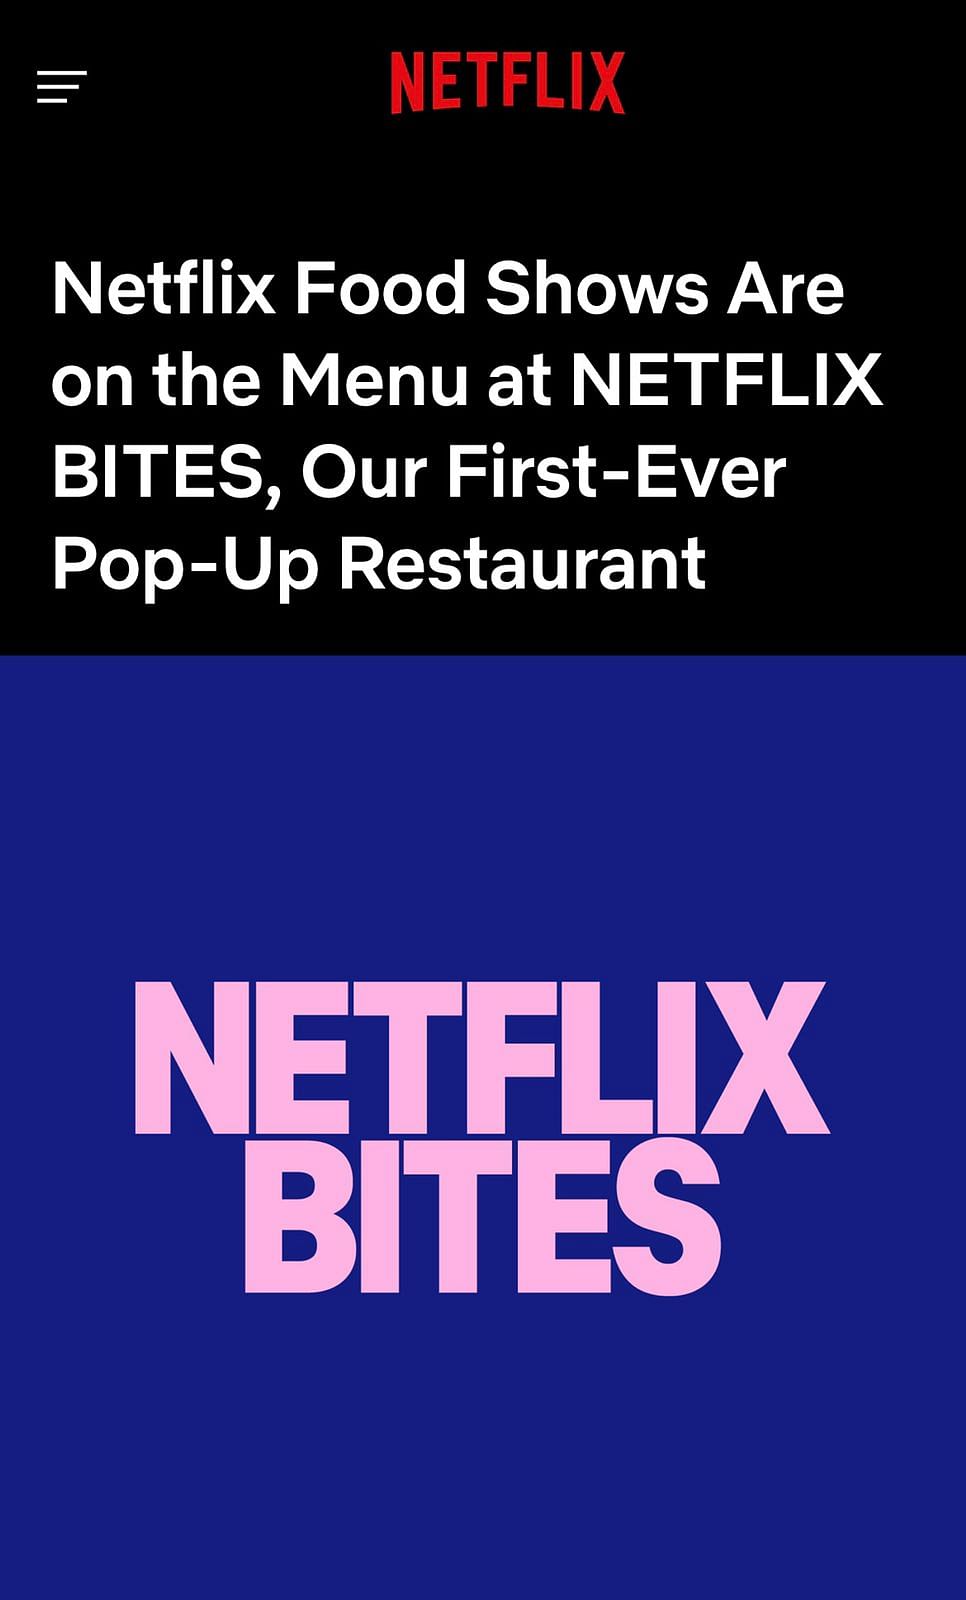 Named Netflix Bites, the restaurant is set to feature celebrity chefs like Curtis Stone and Ann Kim, among others.